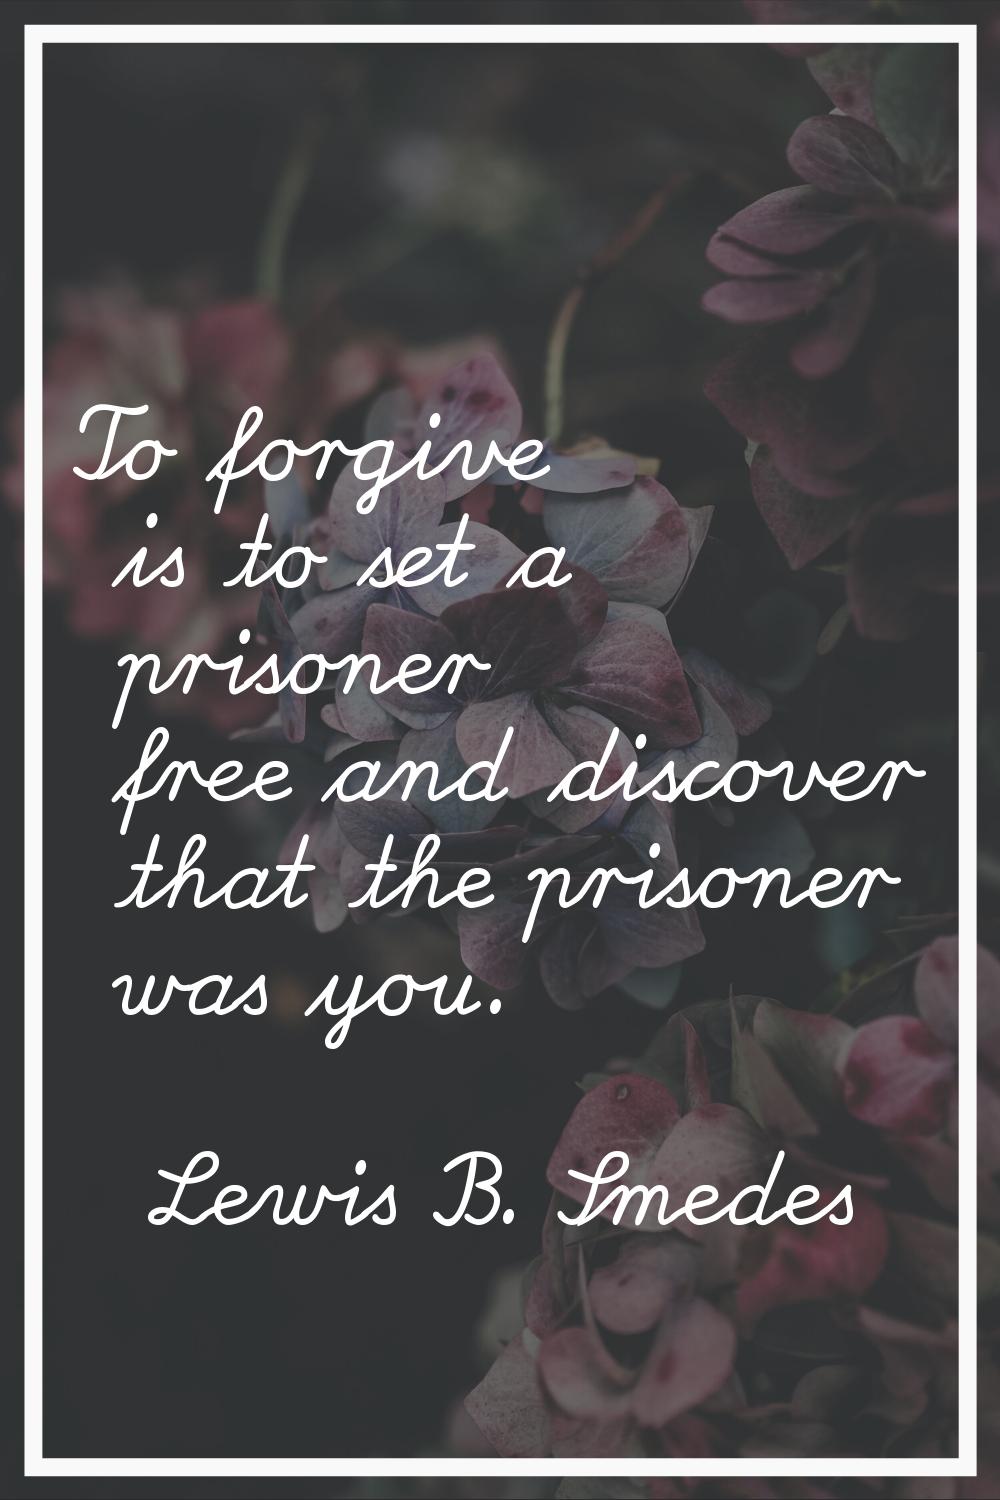 To forgive is to set a prisoner free and discover that the prisoner was you.